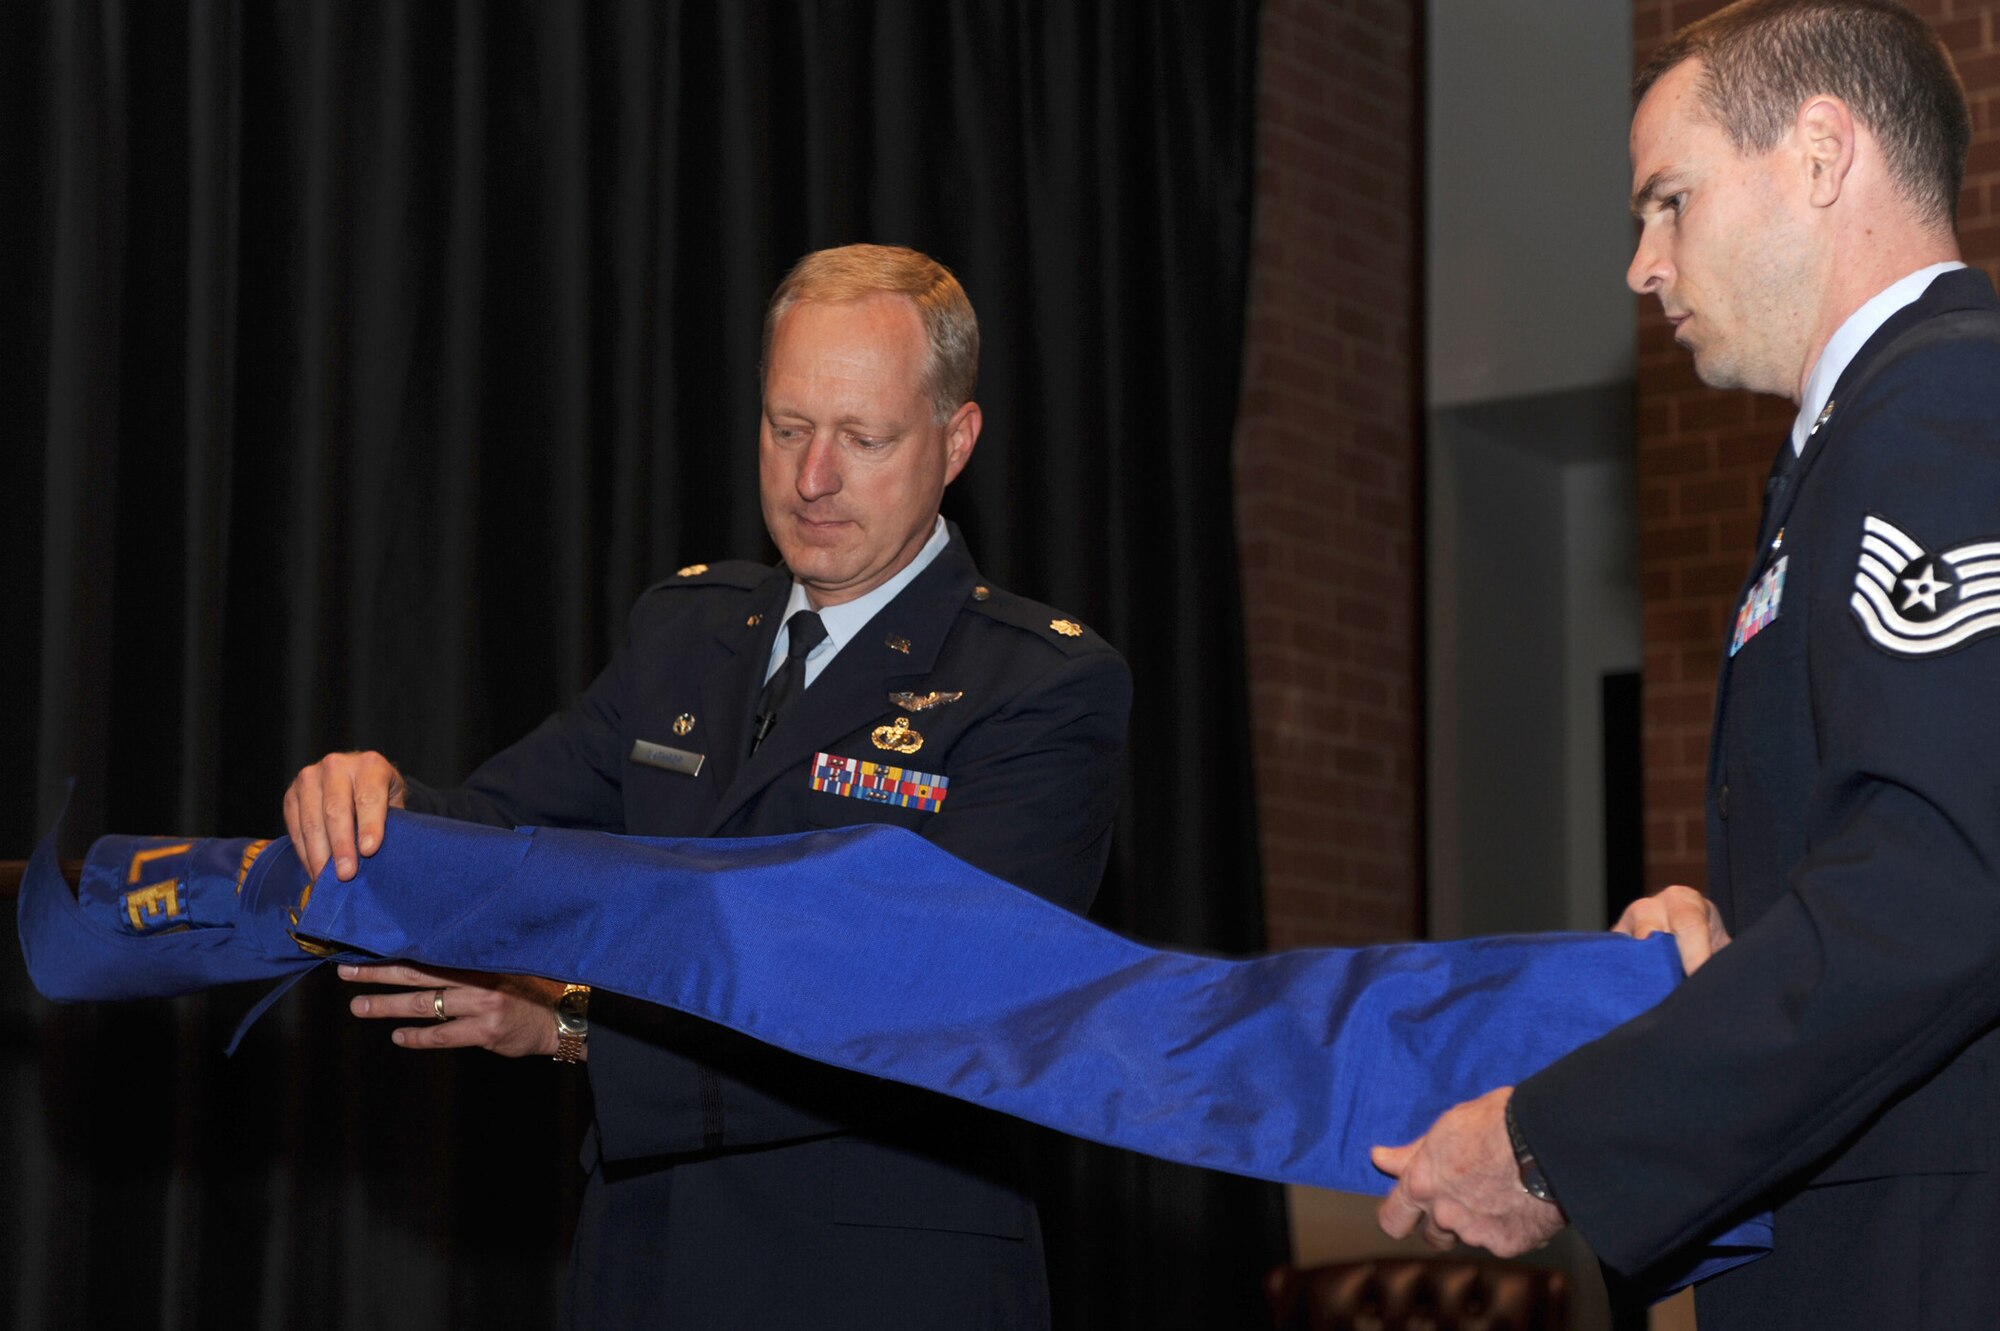 Lt. Col. Jeffrey Lathrop, the last commander of the Air Mobility Battlelab, pulls the covering over the flag of the battlelab with the help of Tech. Sgt. Joe Jones during a deactivation ceremony of the battlelab in the U.S. Air Force Expeditionary Center's Grace Peterson Hall Sept. 24, 2008.  The battlelab closed after 10 years.  (U.S. Air Force Photo/Staff Sgt. Nathan Bevier)